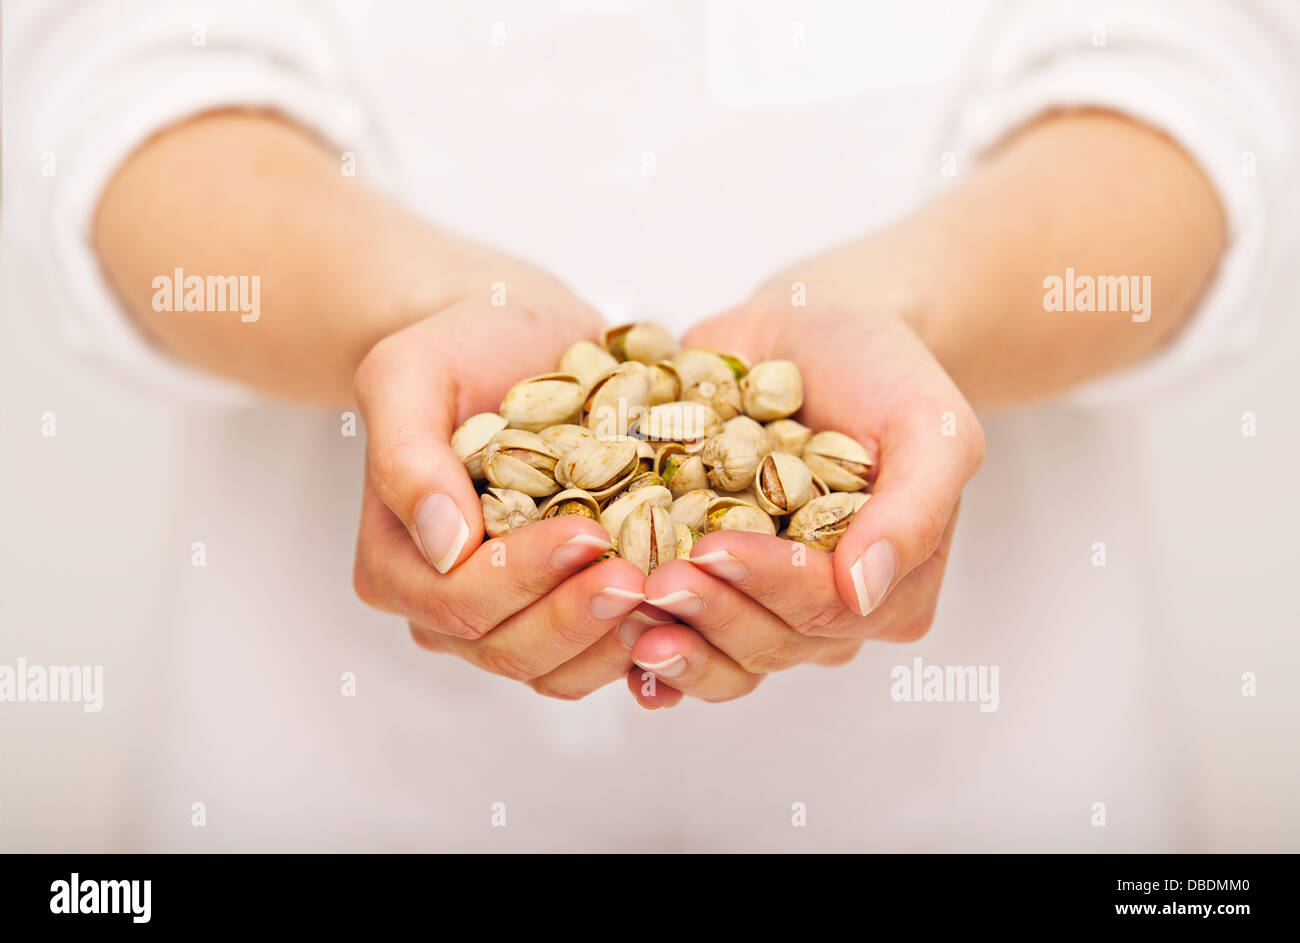 Woman offering a handful of pistachio nuts Stock Photo